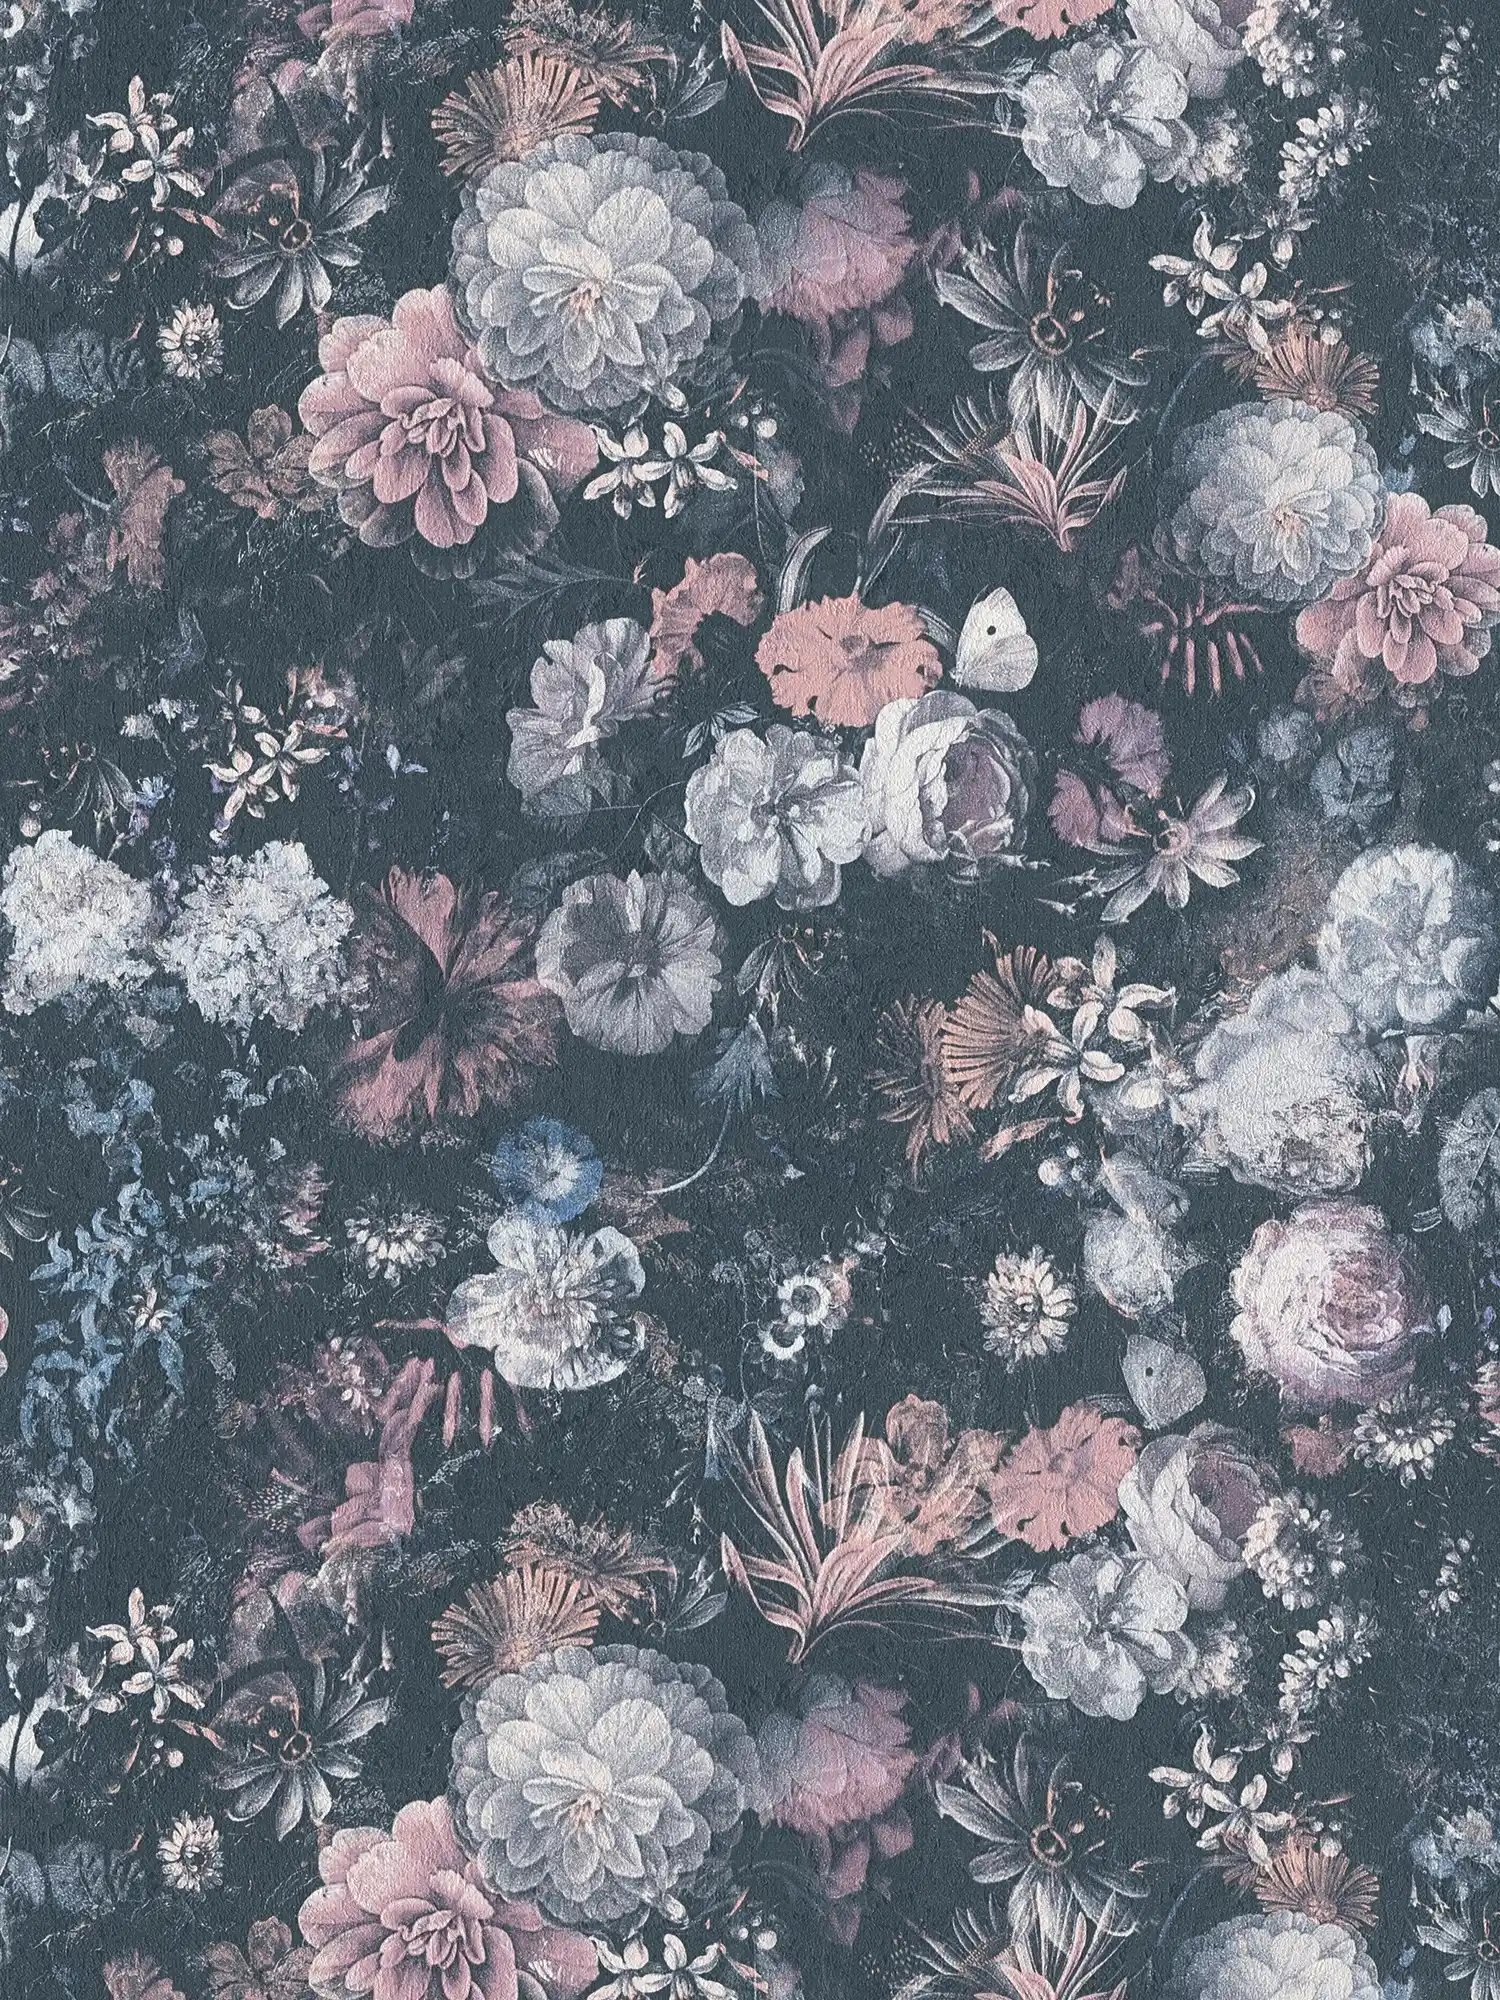 Floral wallpaper roses painting with texture effect - grey, pink
